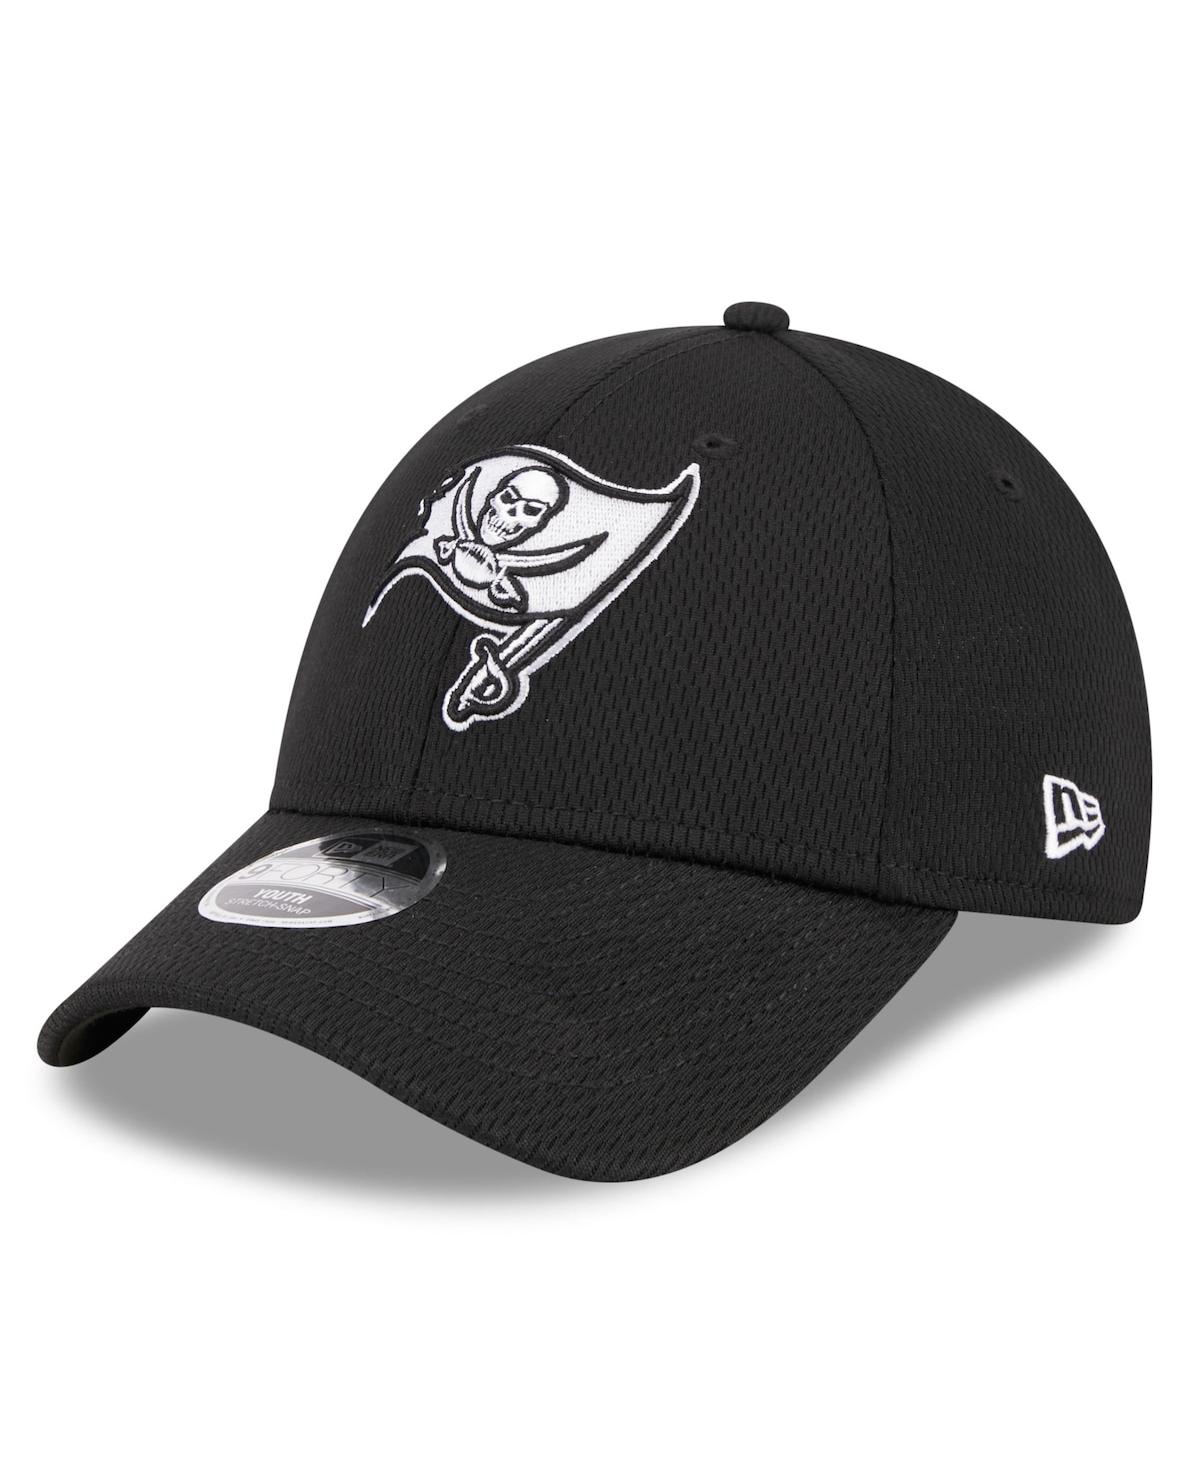 New Era Kids' Youth Boys And Girls  Black Tampa Bay Buccaneers Main B-dub 9forty Adjustable Hat